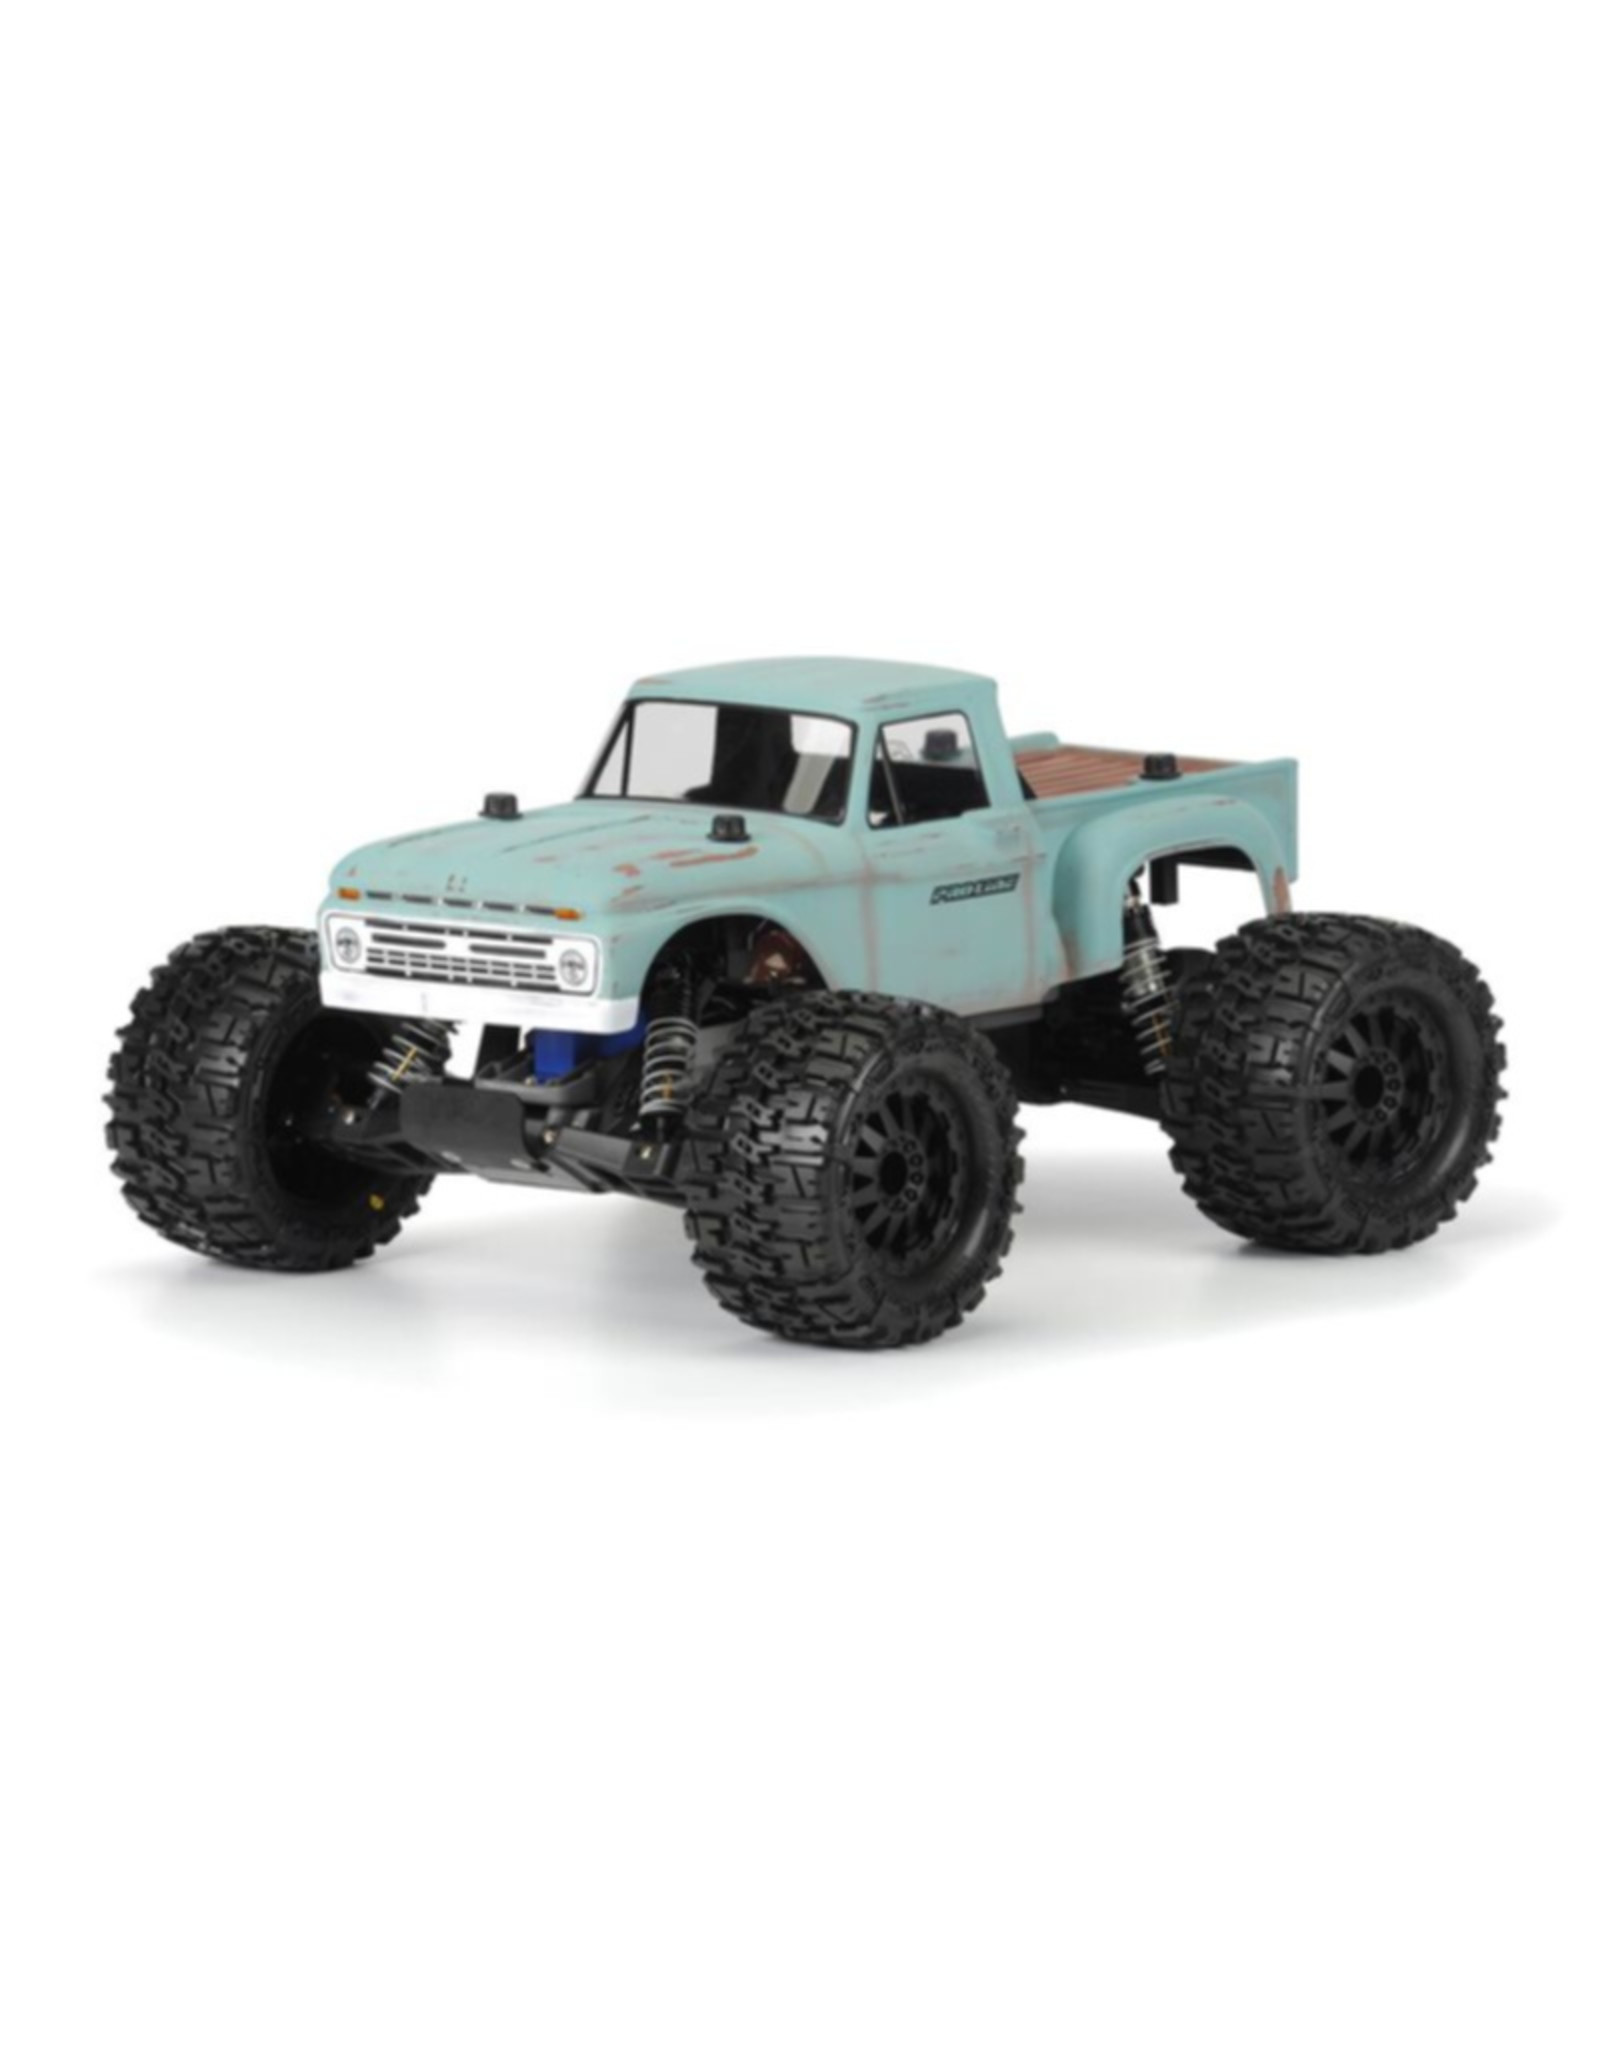 Pro-Line Racing PRO341200 1966 Ford F-100 Clear Body : Stampede